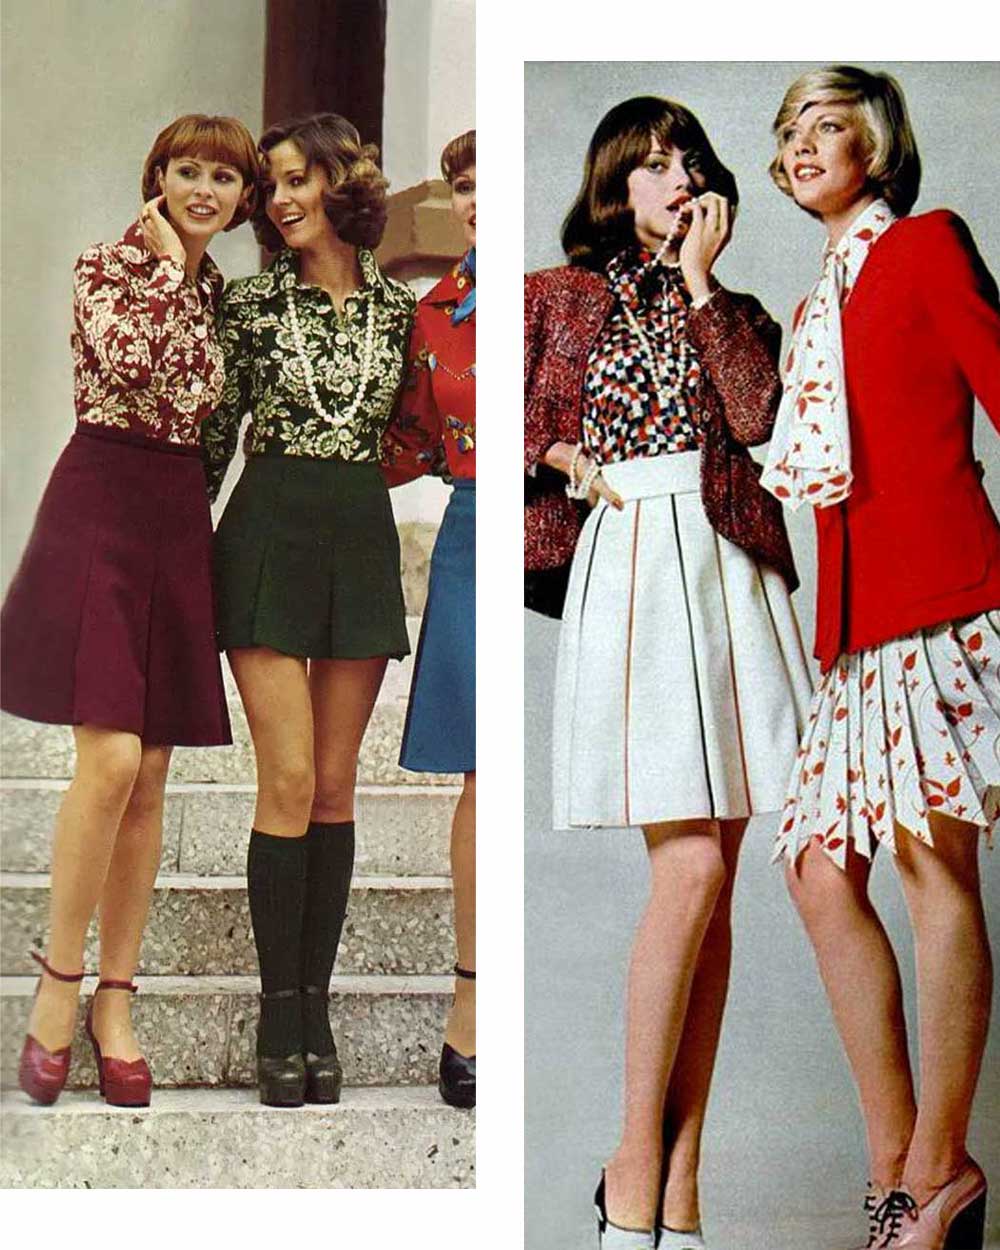 Preppy style clothes as casual workwear in the 70s